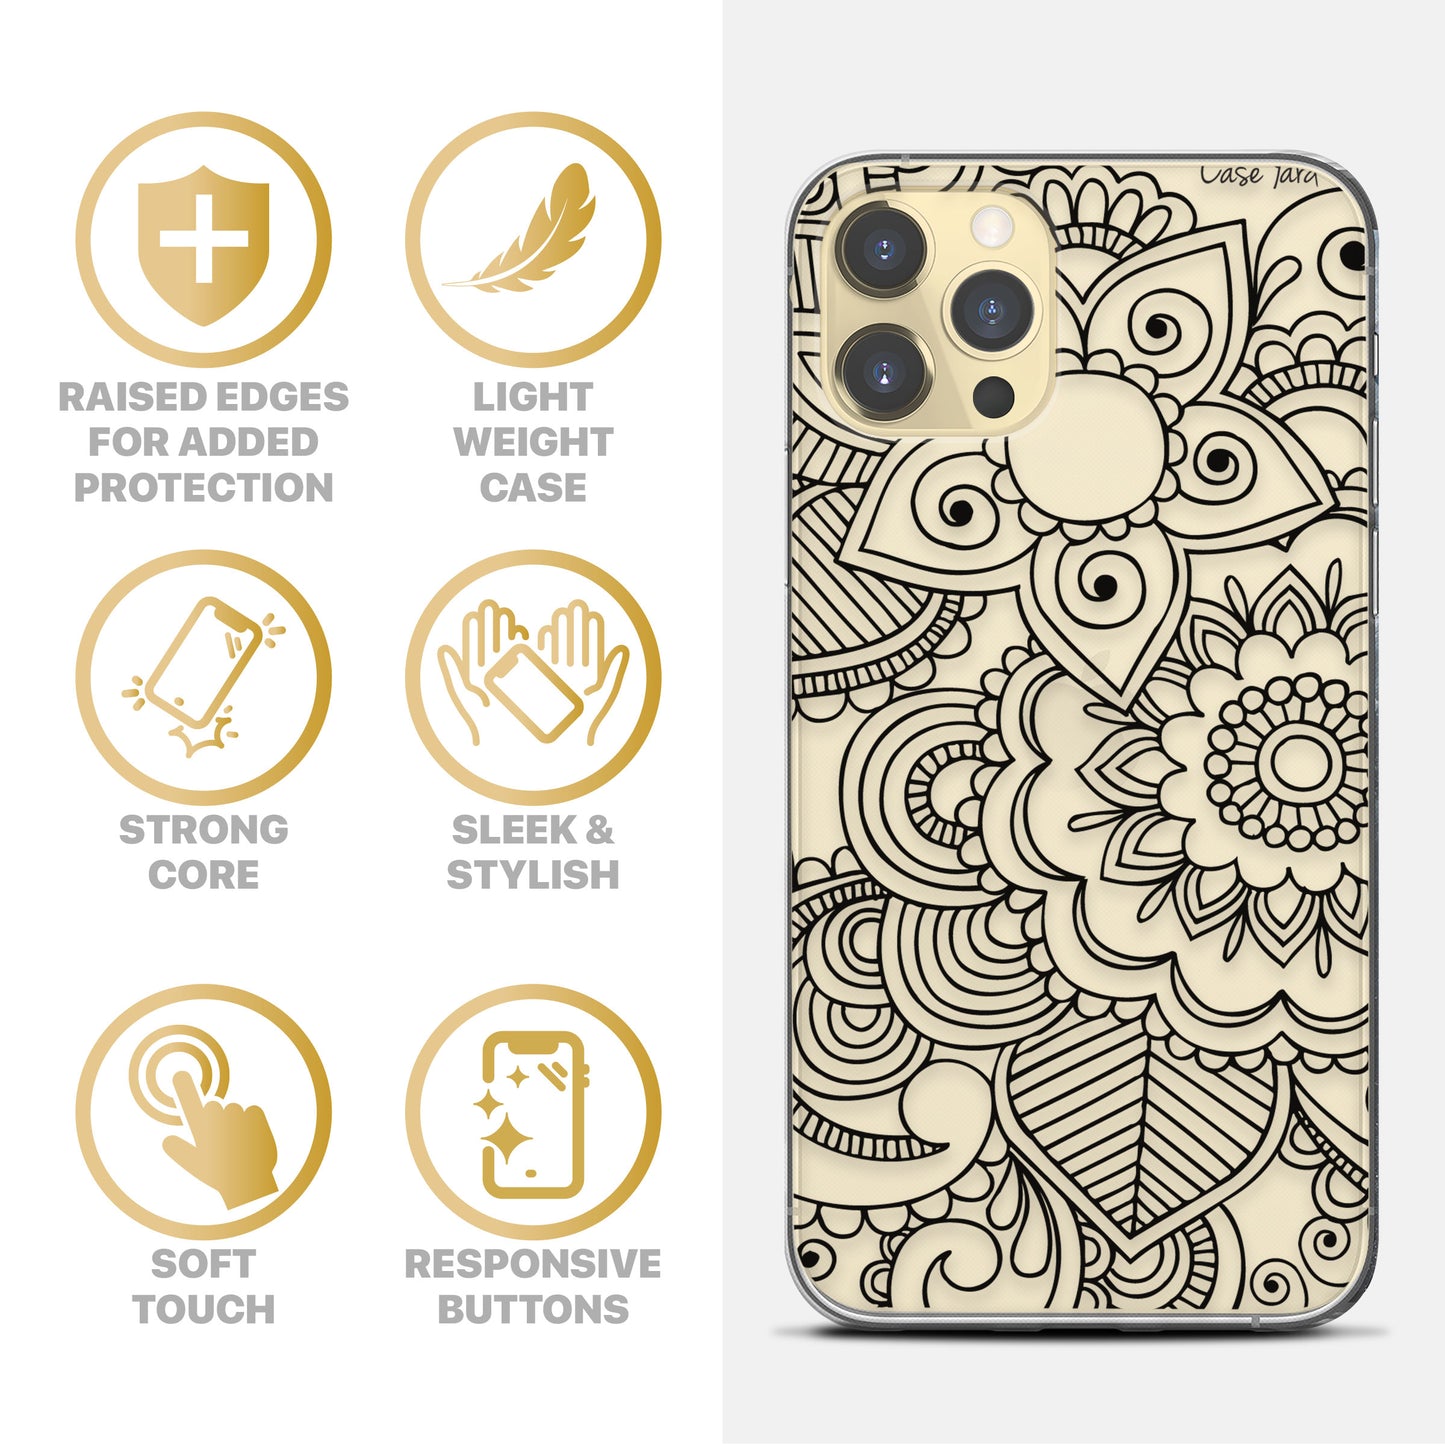 TPU Clear case with (Henna Mehndi) Design for iPhone & Samsung Phones